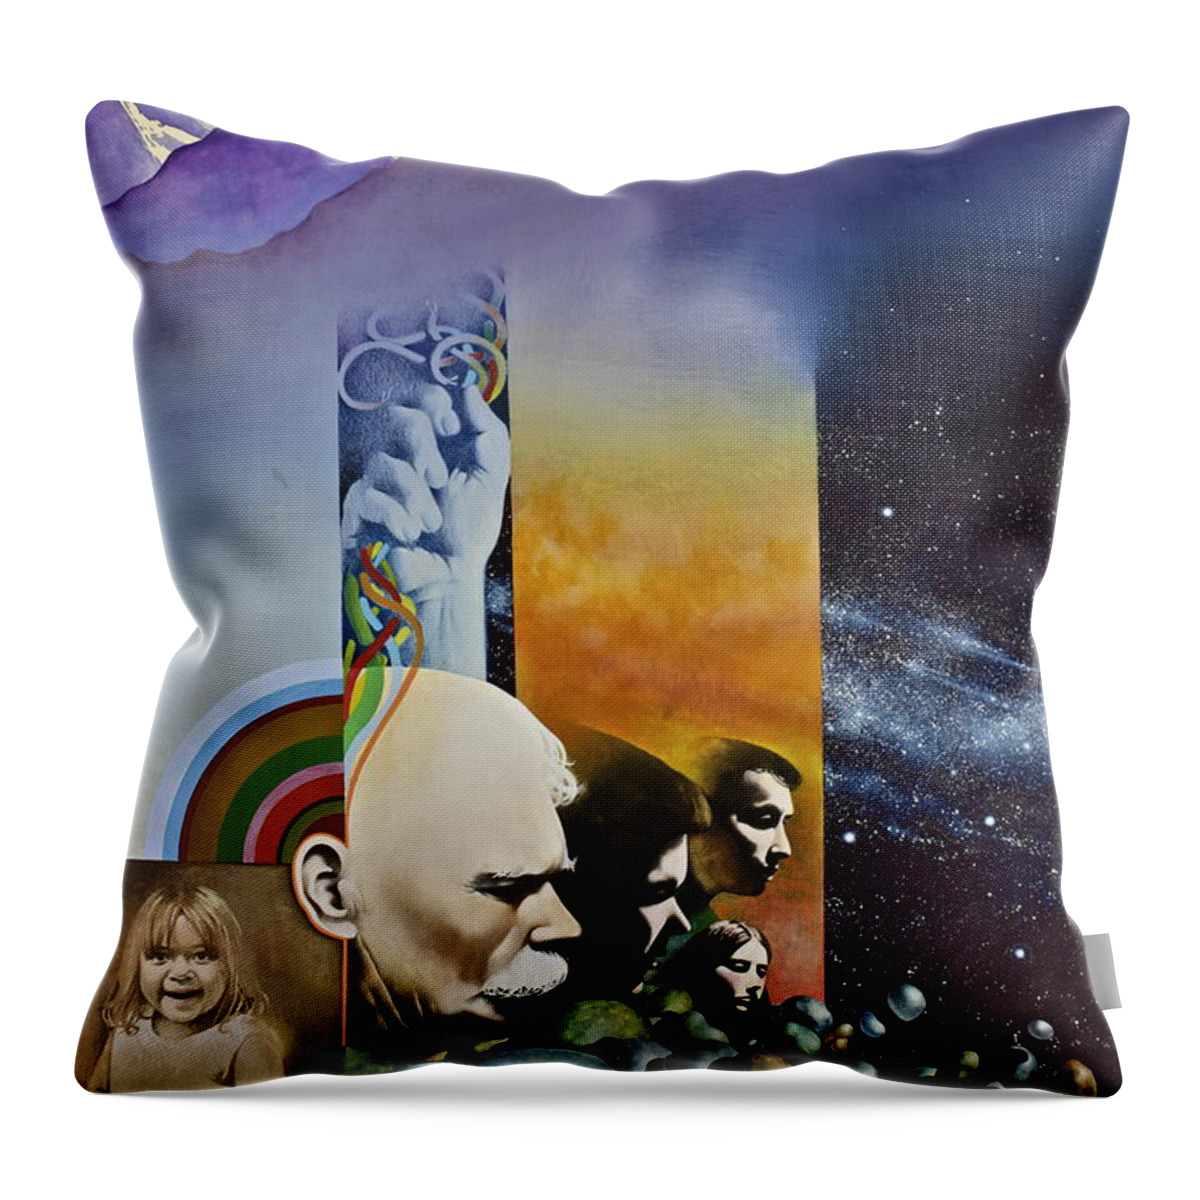 Water Color Throw Pillow featuring the painting Lucid Dimensions by Cliff Spohn